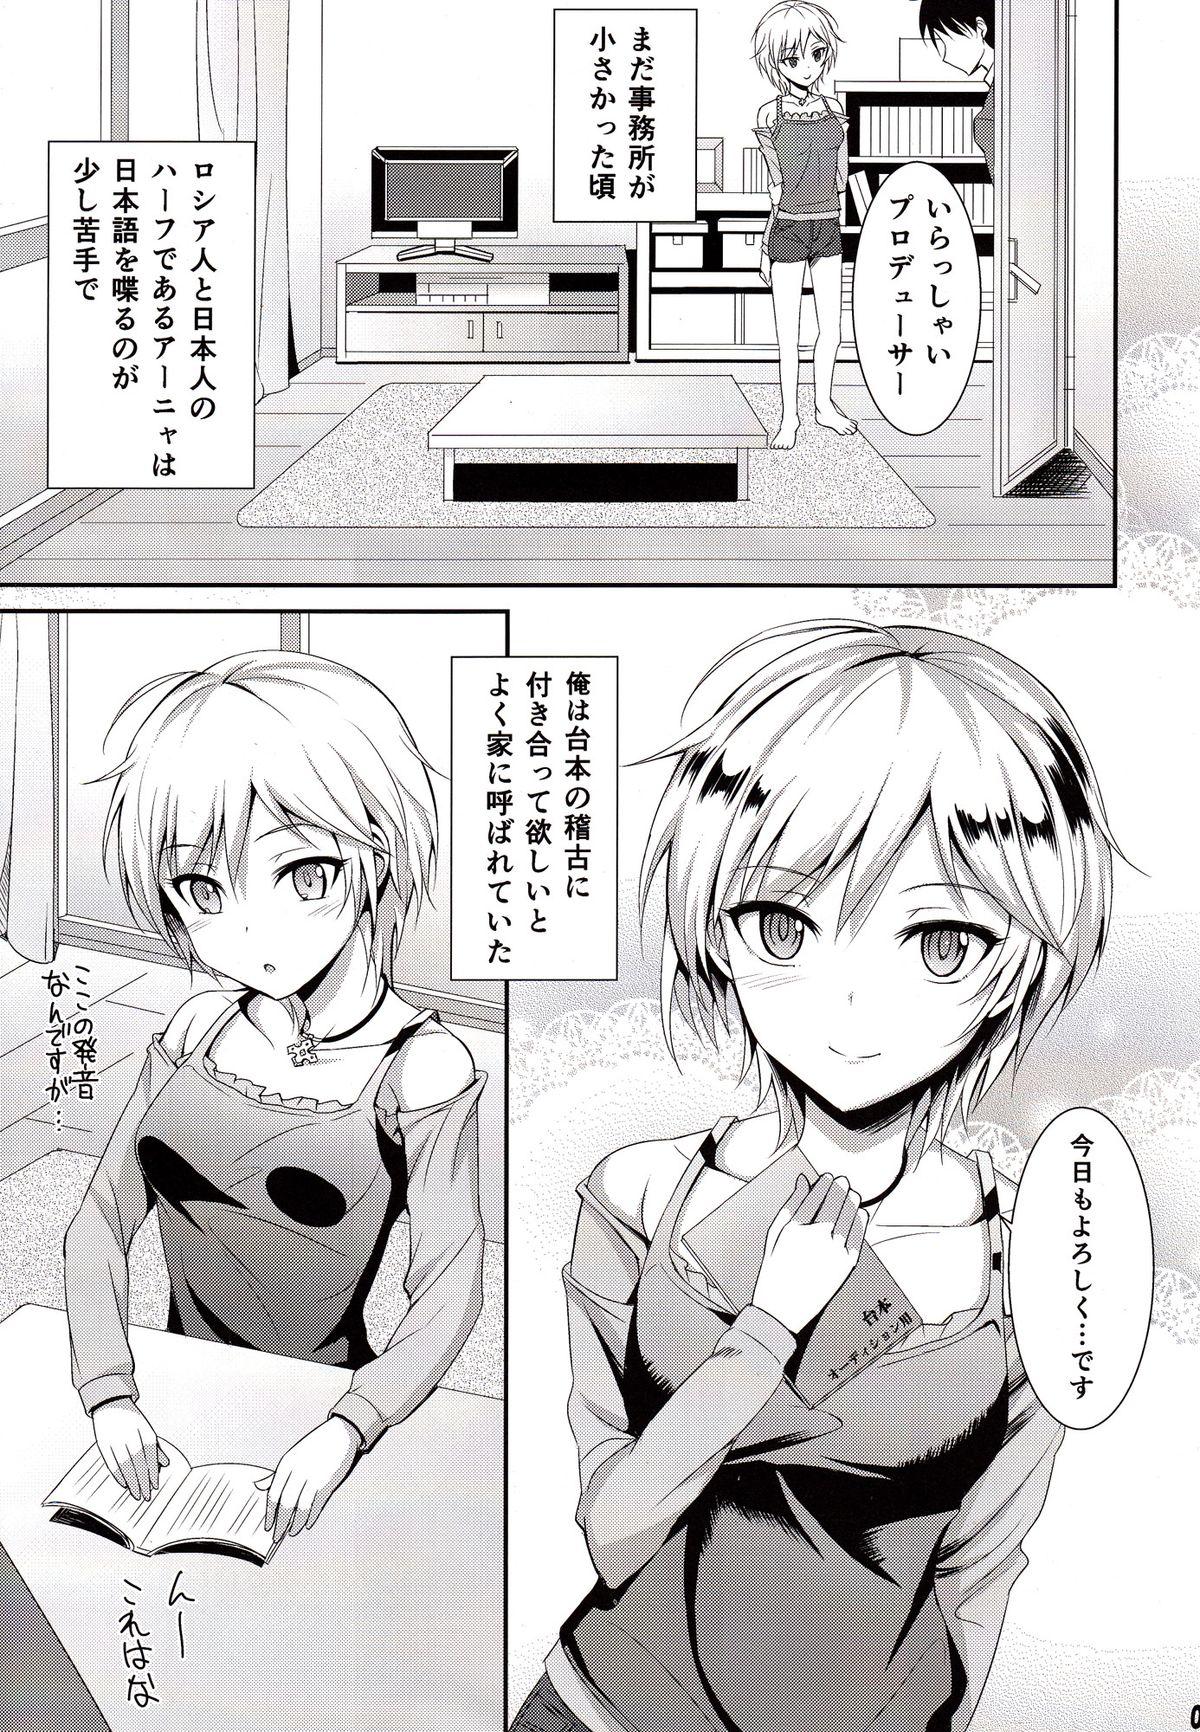 Lez Ice smile - The idolmaster Firsttime - Page 2